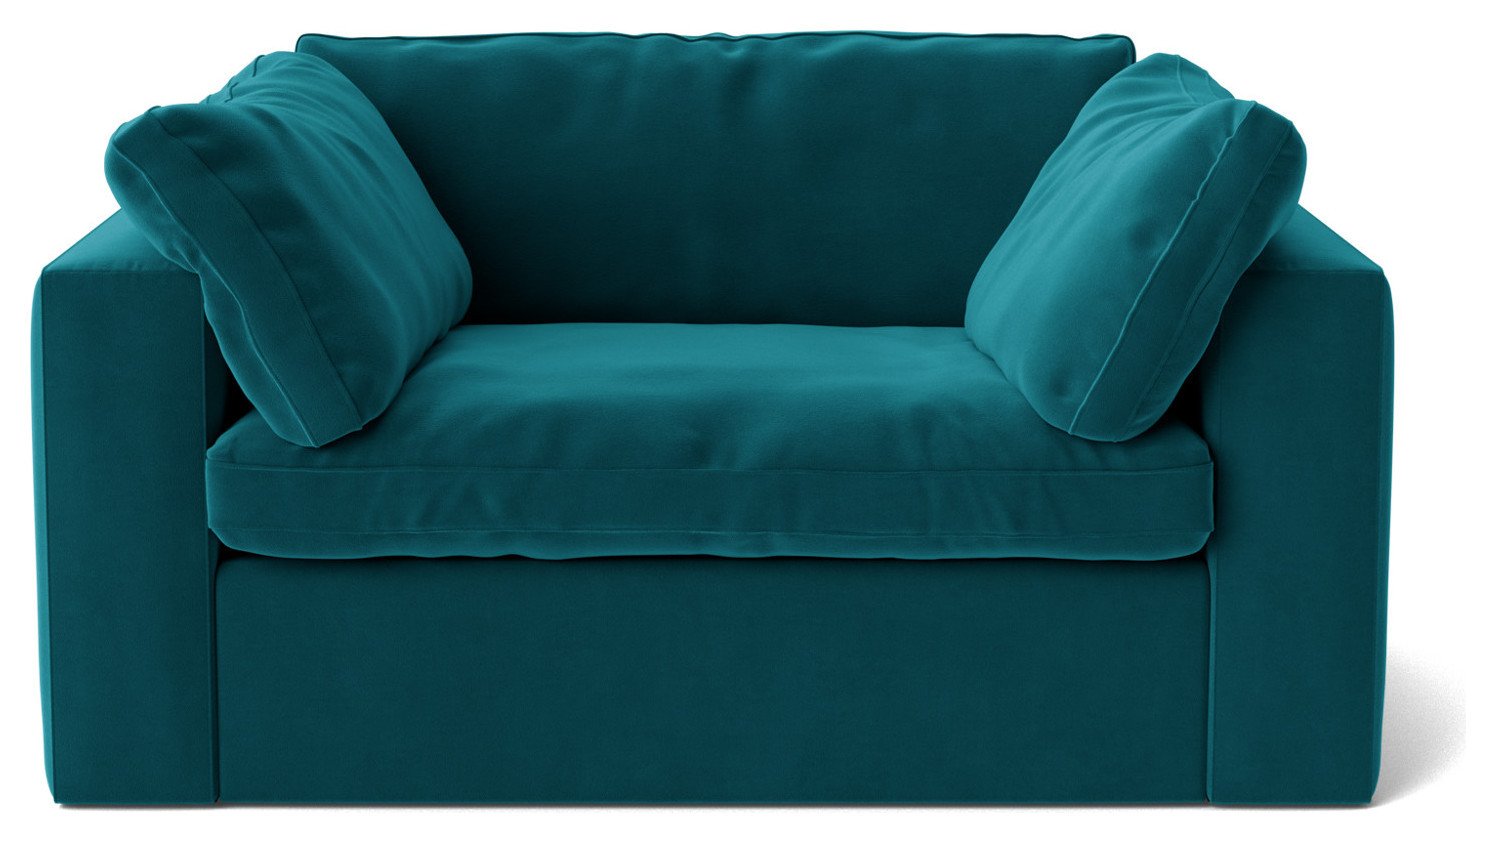 Swoon Seattle Velvet Cuddle Chair - Kingfisher Blue